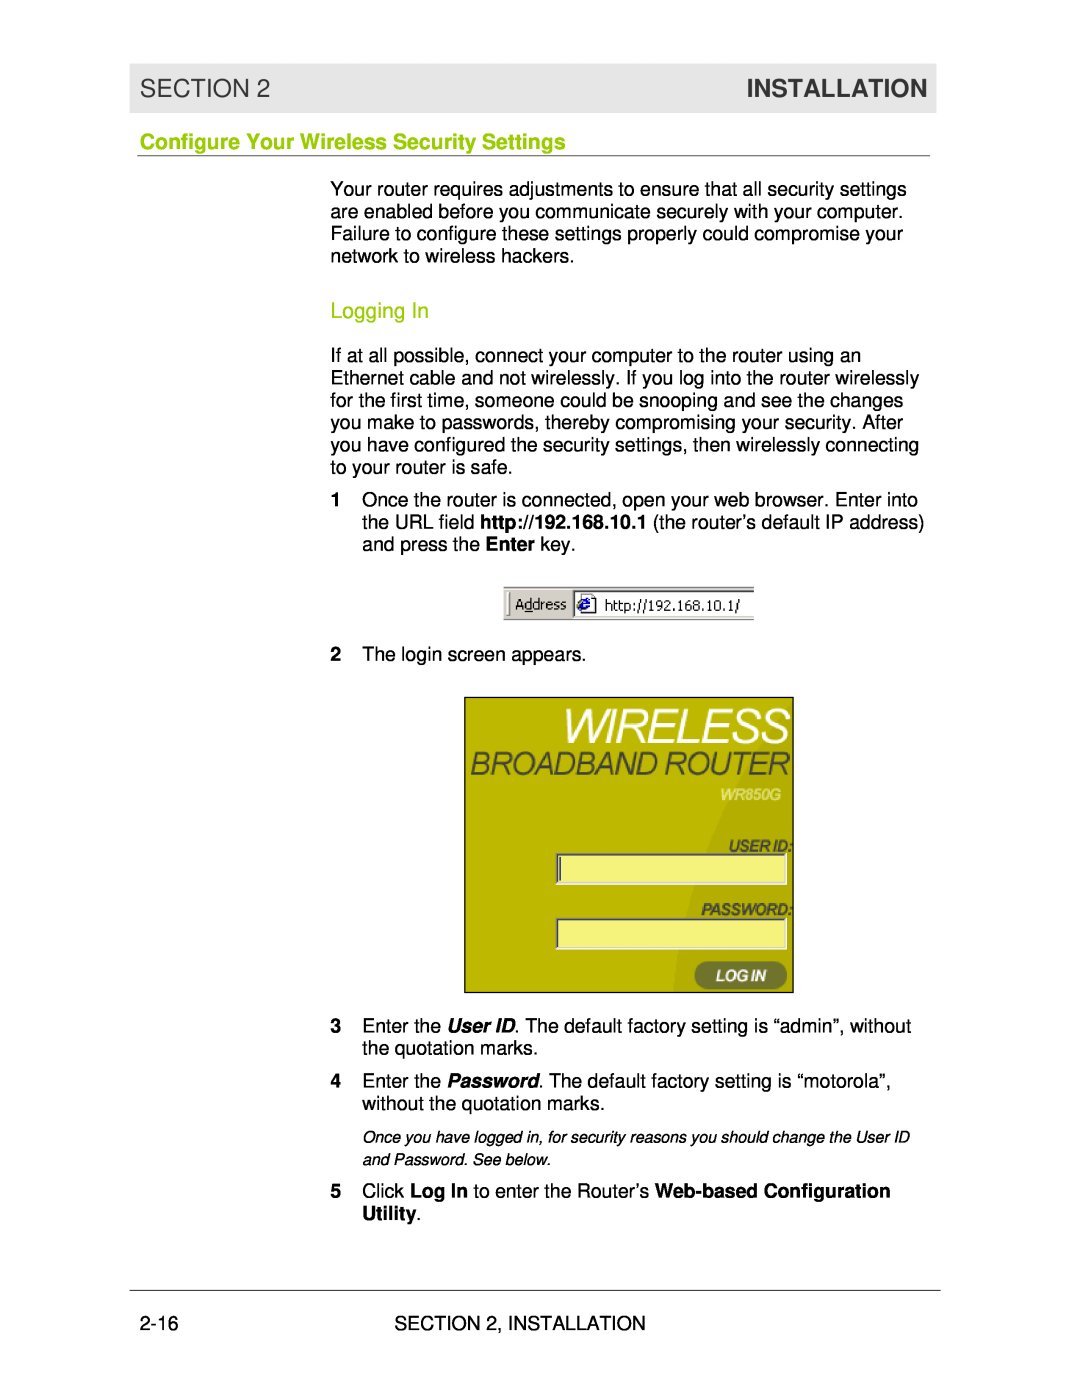 Motorola WR850G manual Configure Your Wireless Security Settings, Logging In, Section, Installation 